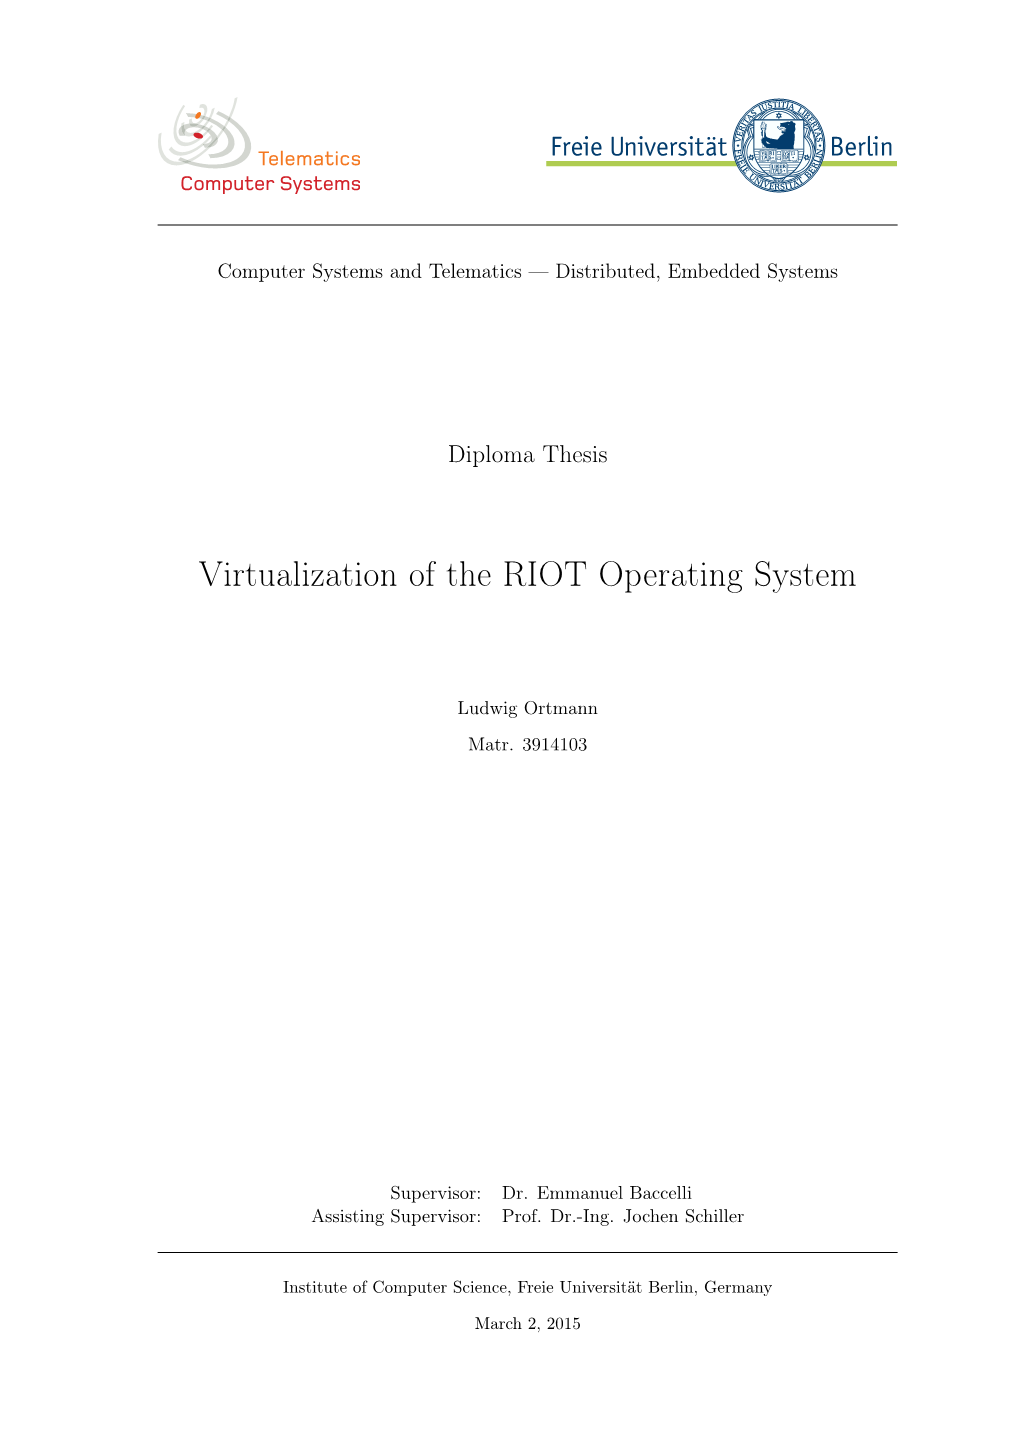 Virtualization of the RIOT Operating System